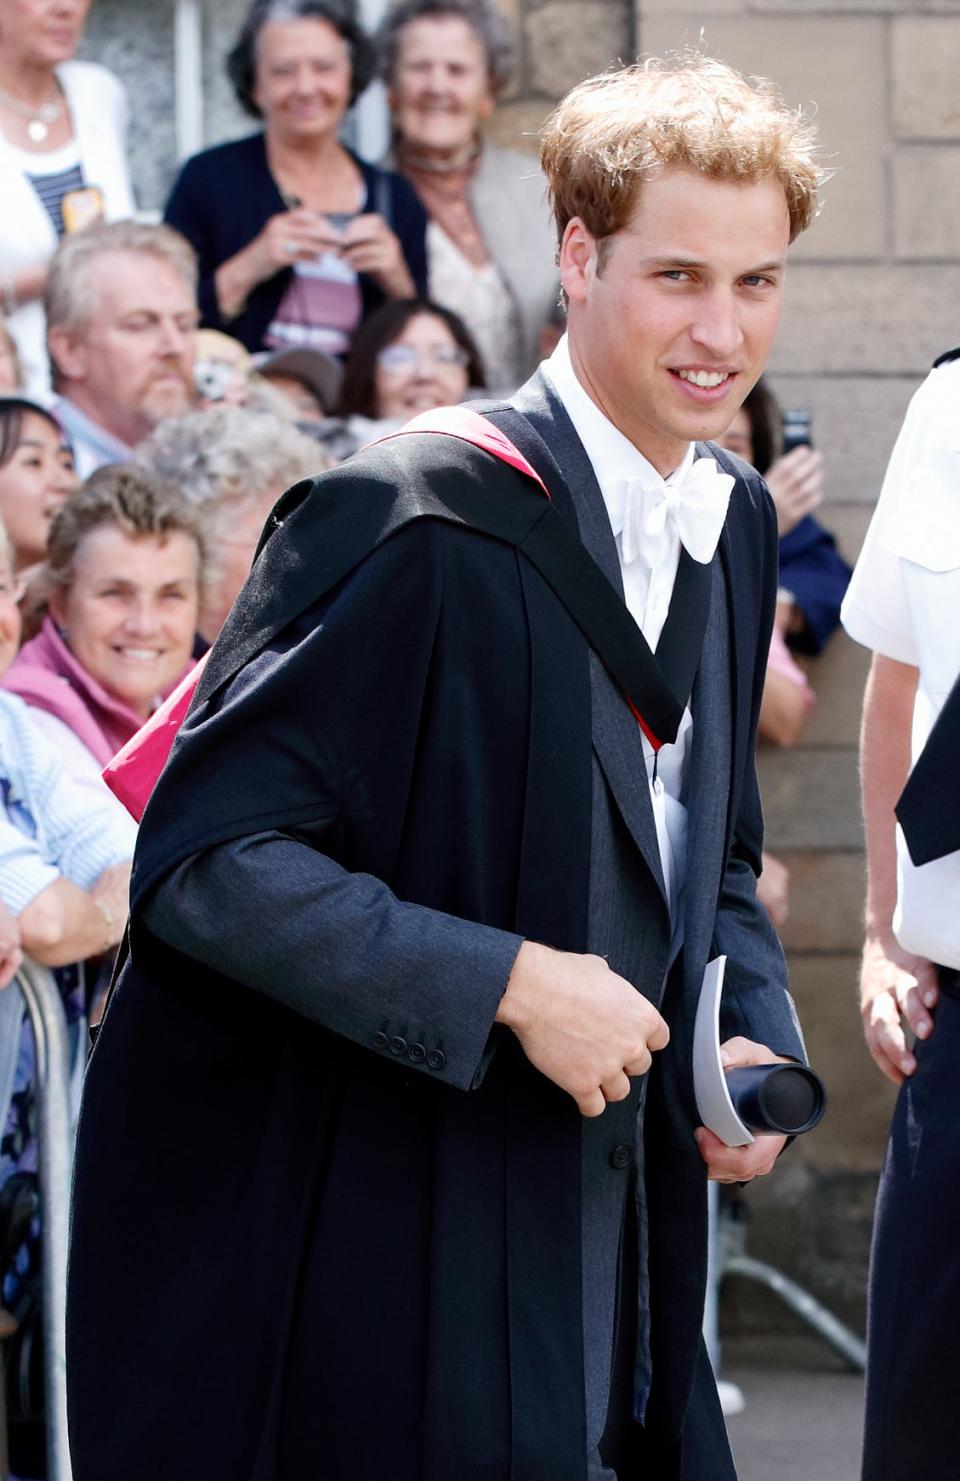 Photograph of Prince William on his graduation day